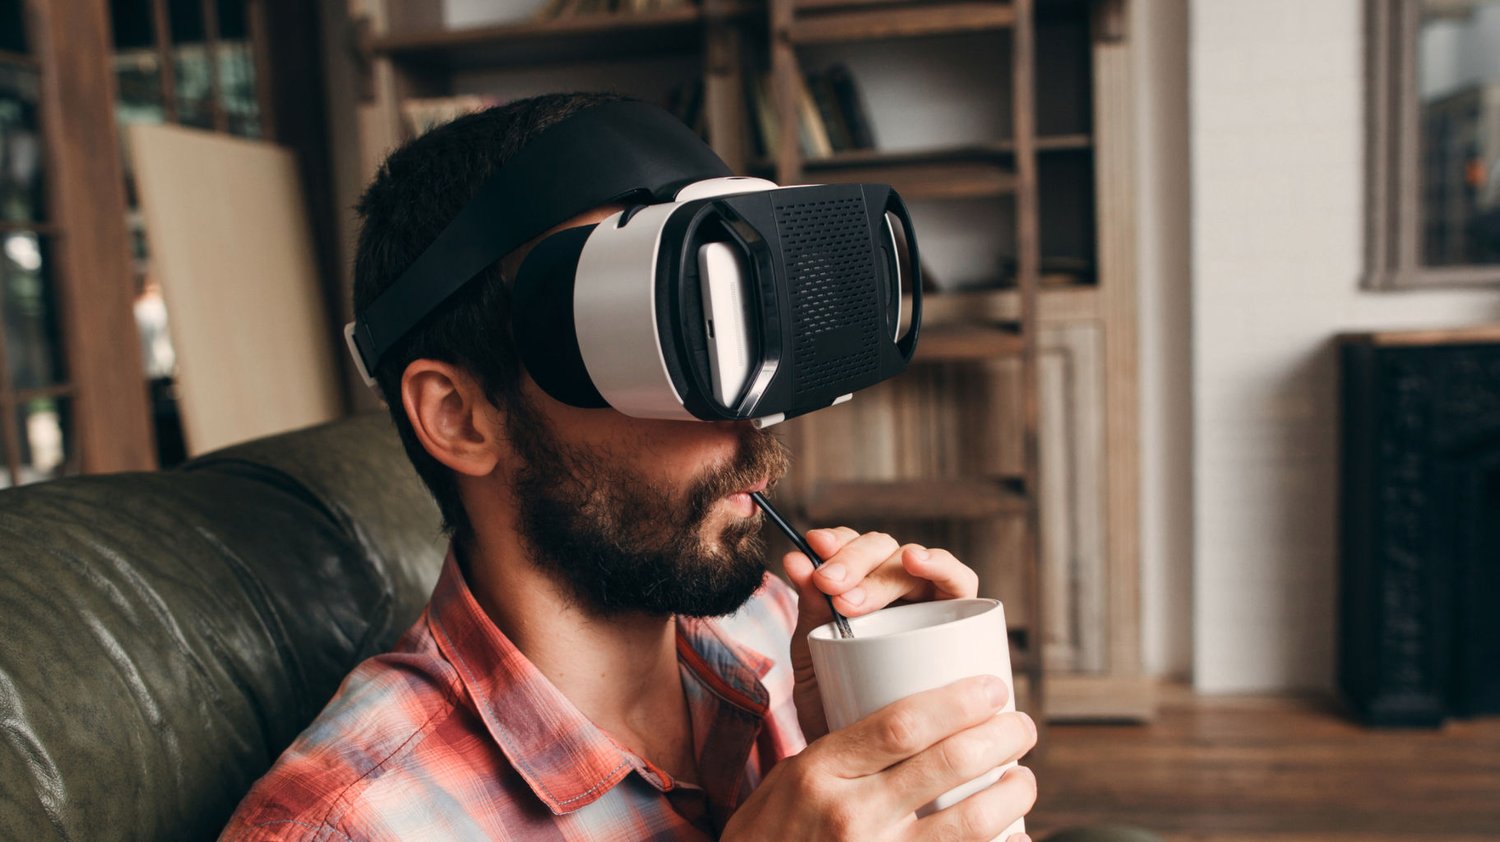 Man wearing VR headset and sipping on drink through straw